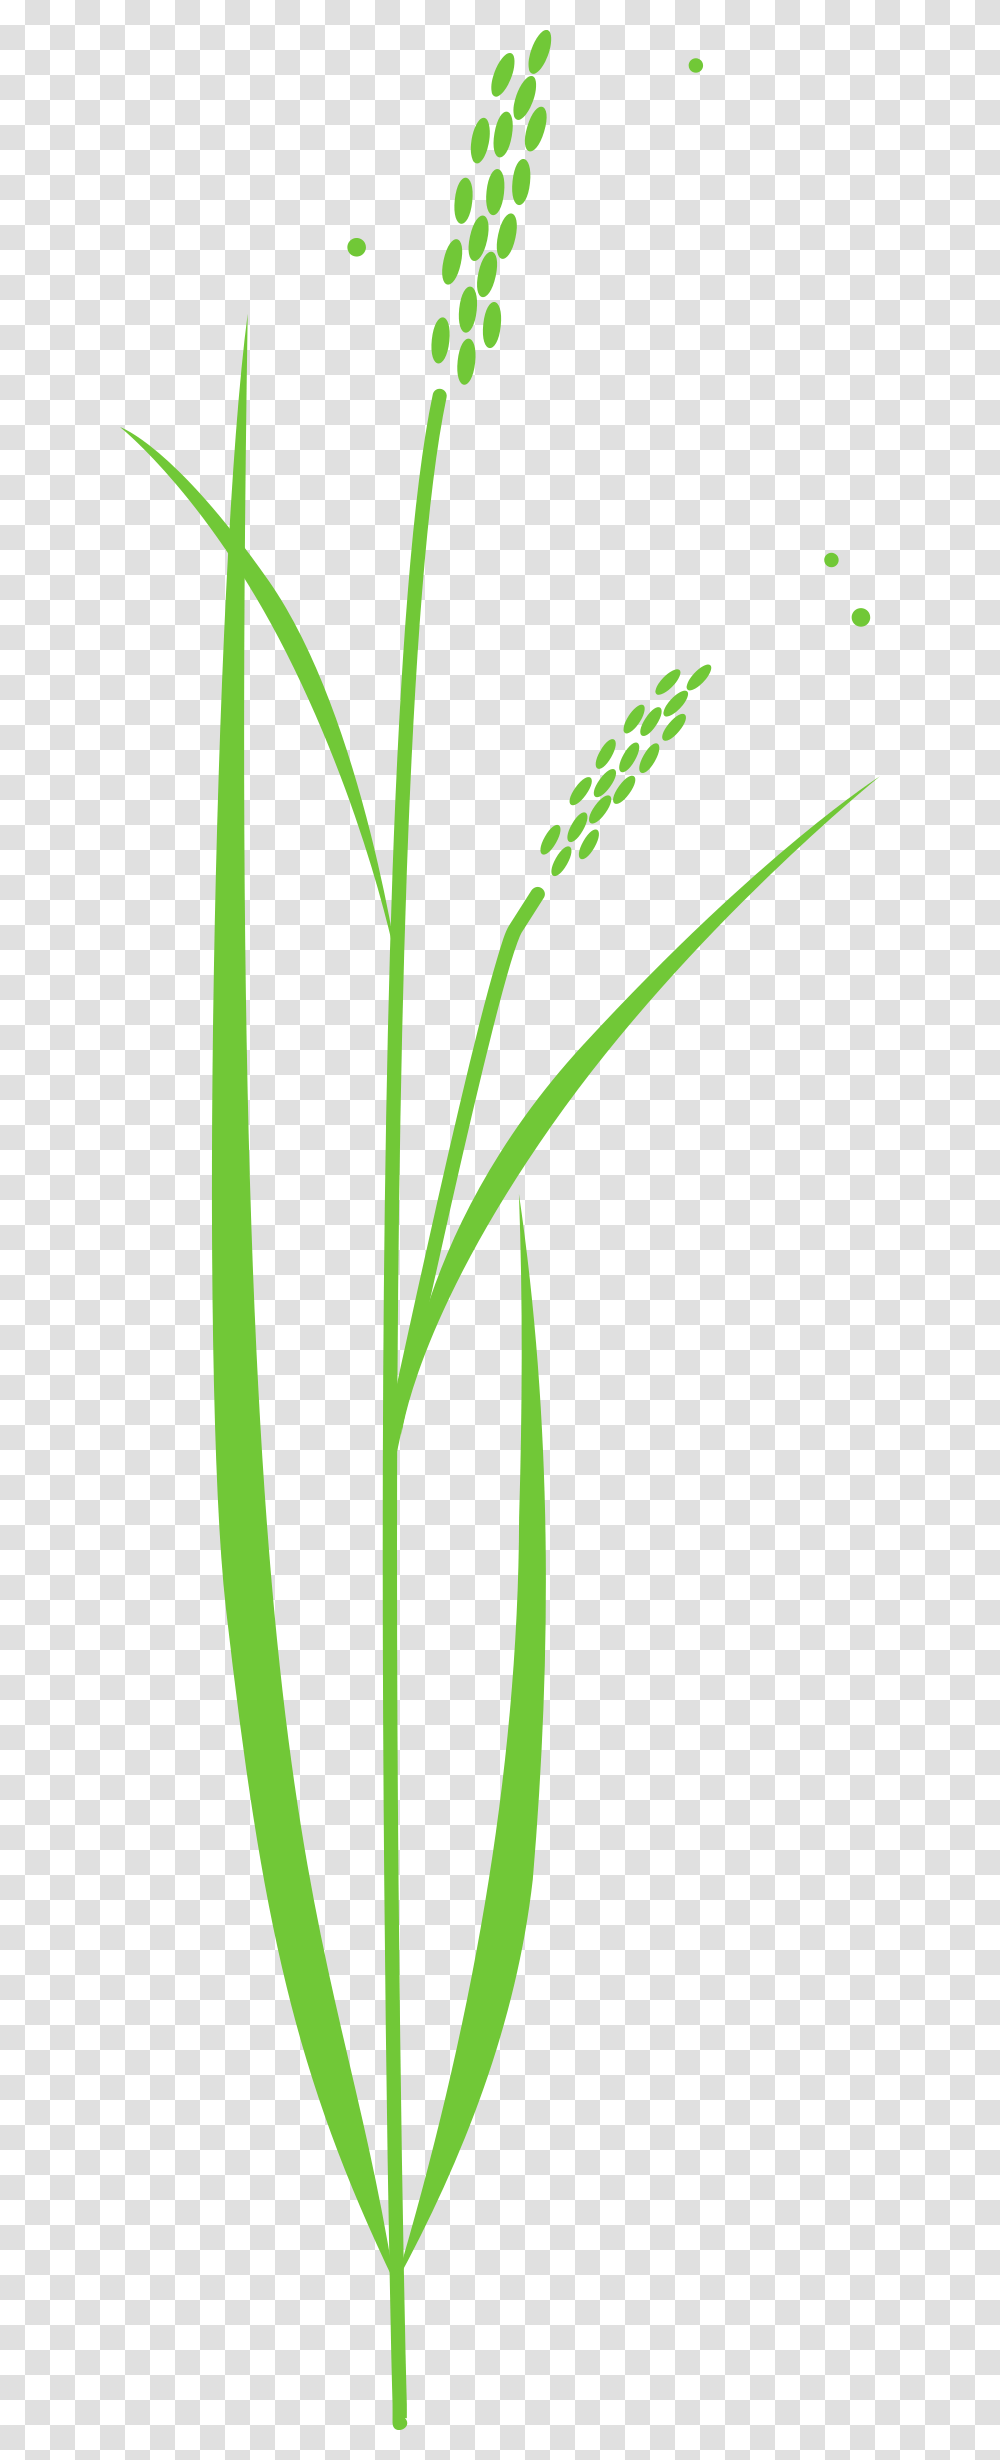 Plant Clip Art Rice Plant Free Clipart, Grass, Flower, Blossom, Daffodil Transparent Png